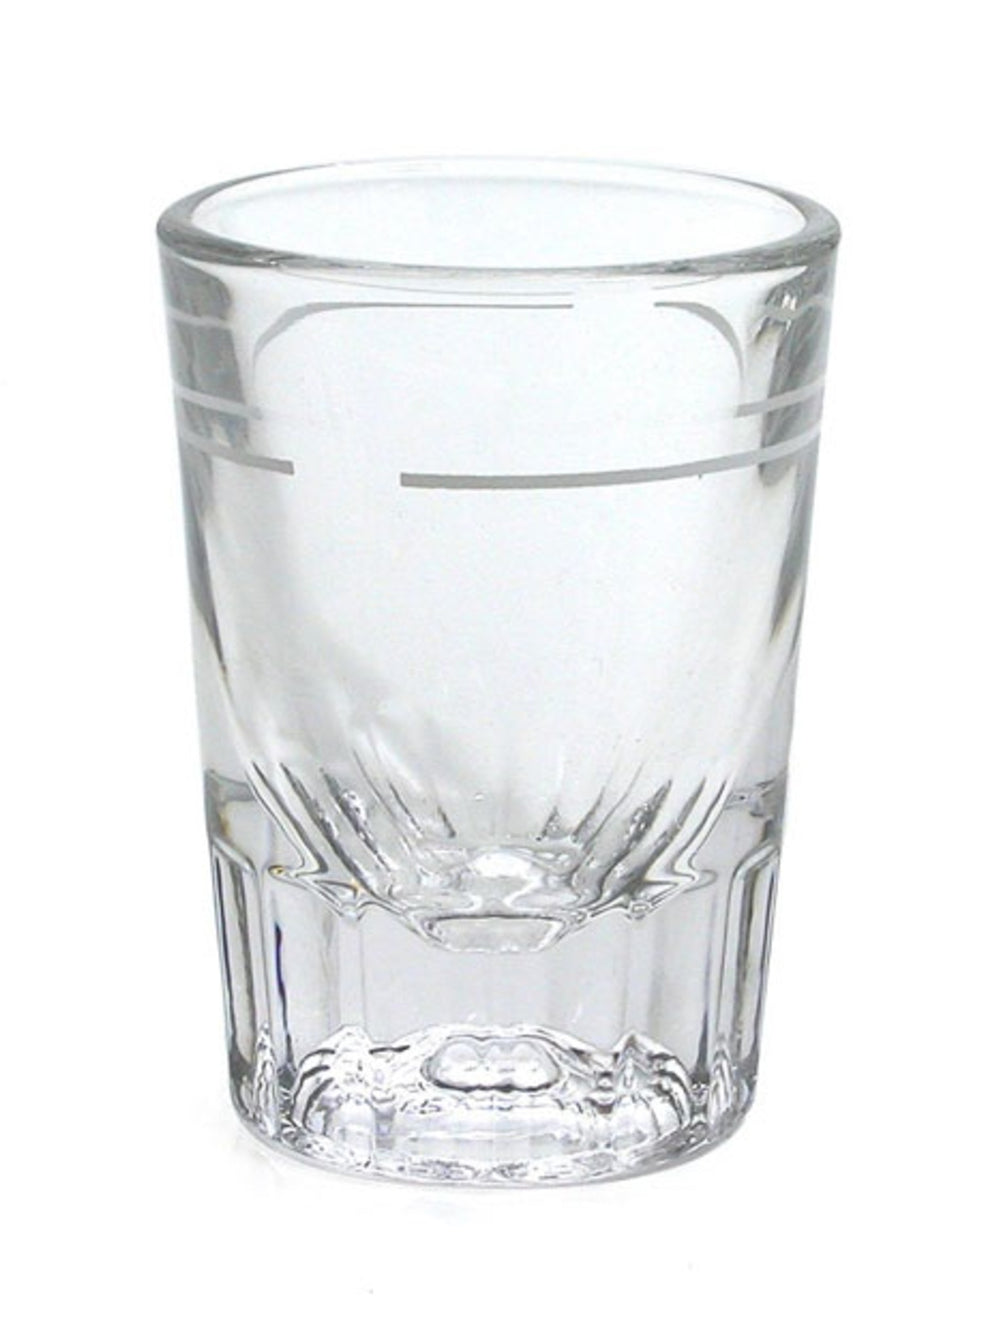 https://cdn.shopify.com/s/files/1/2404/0687/products/espresso_parts_heavy_espresso_shot_glass_with_line_1point5ounce.jpg?v=1630422440&width=1000